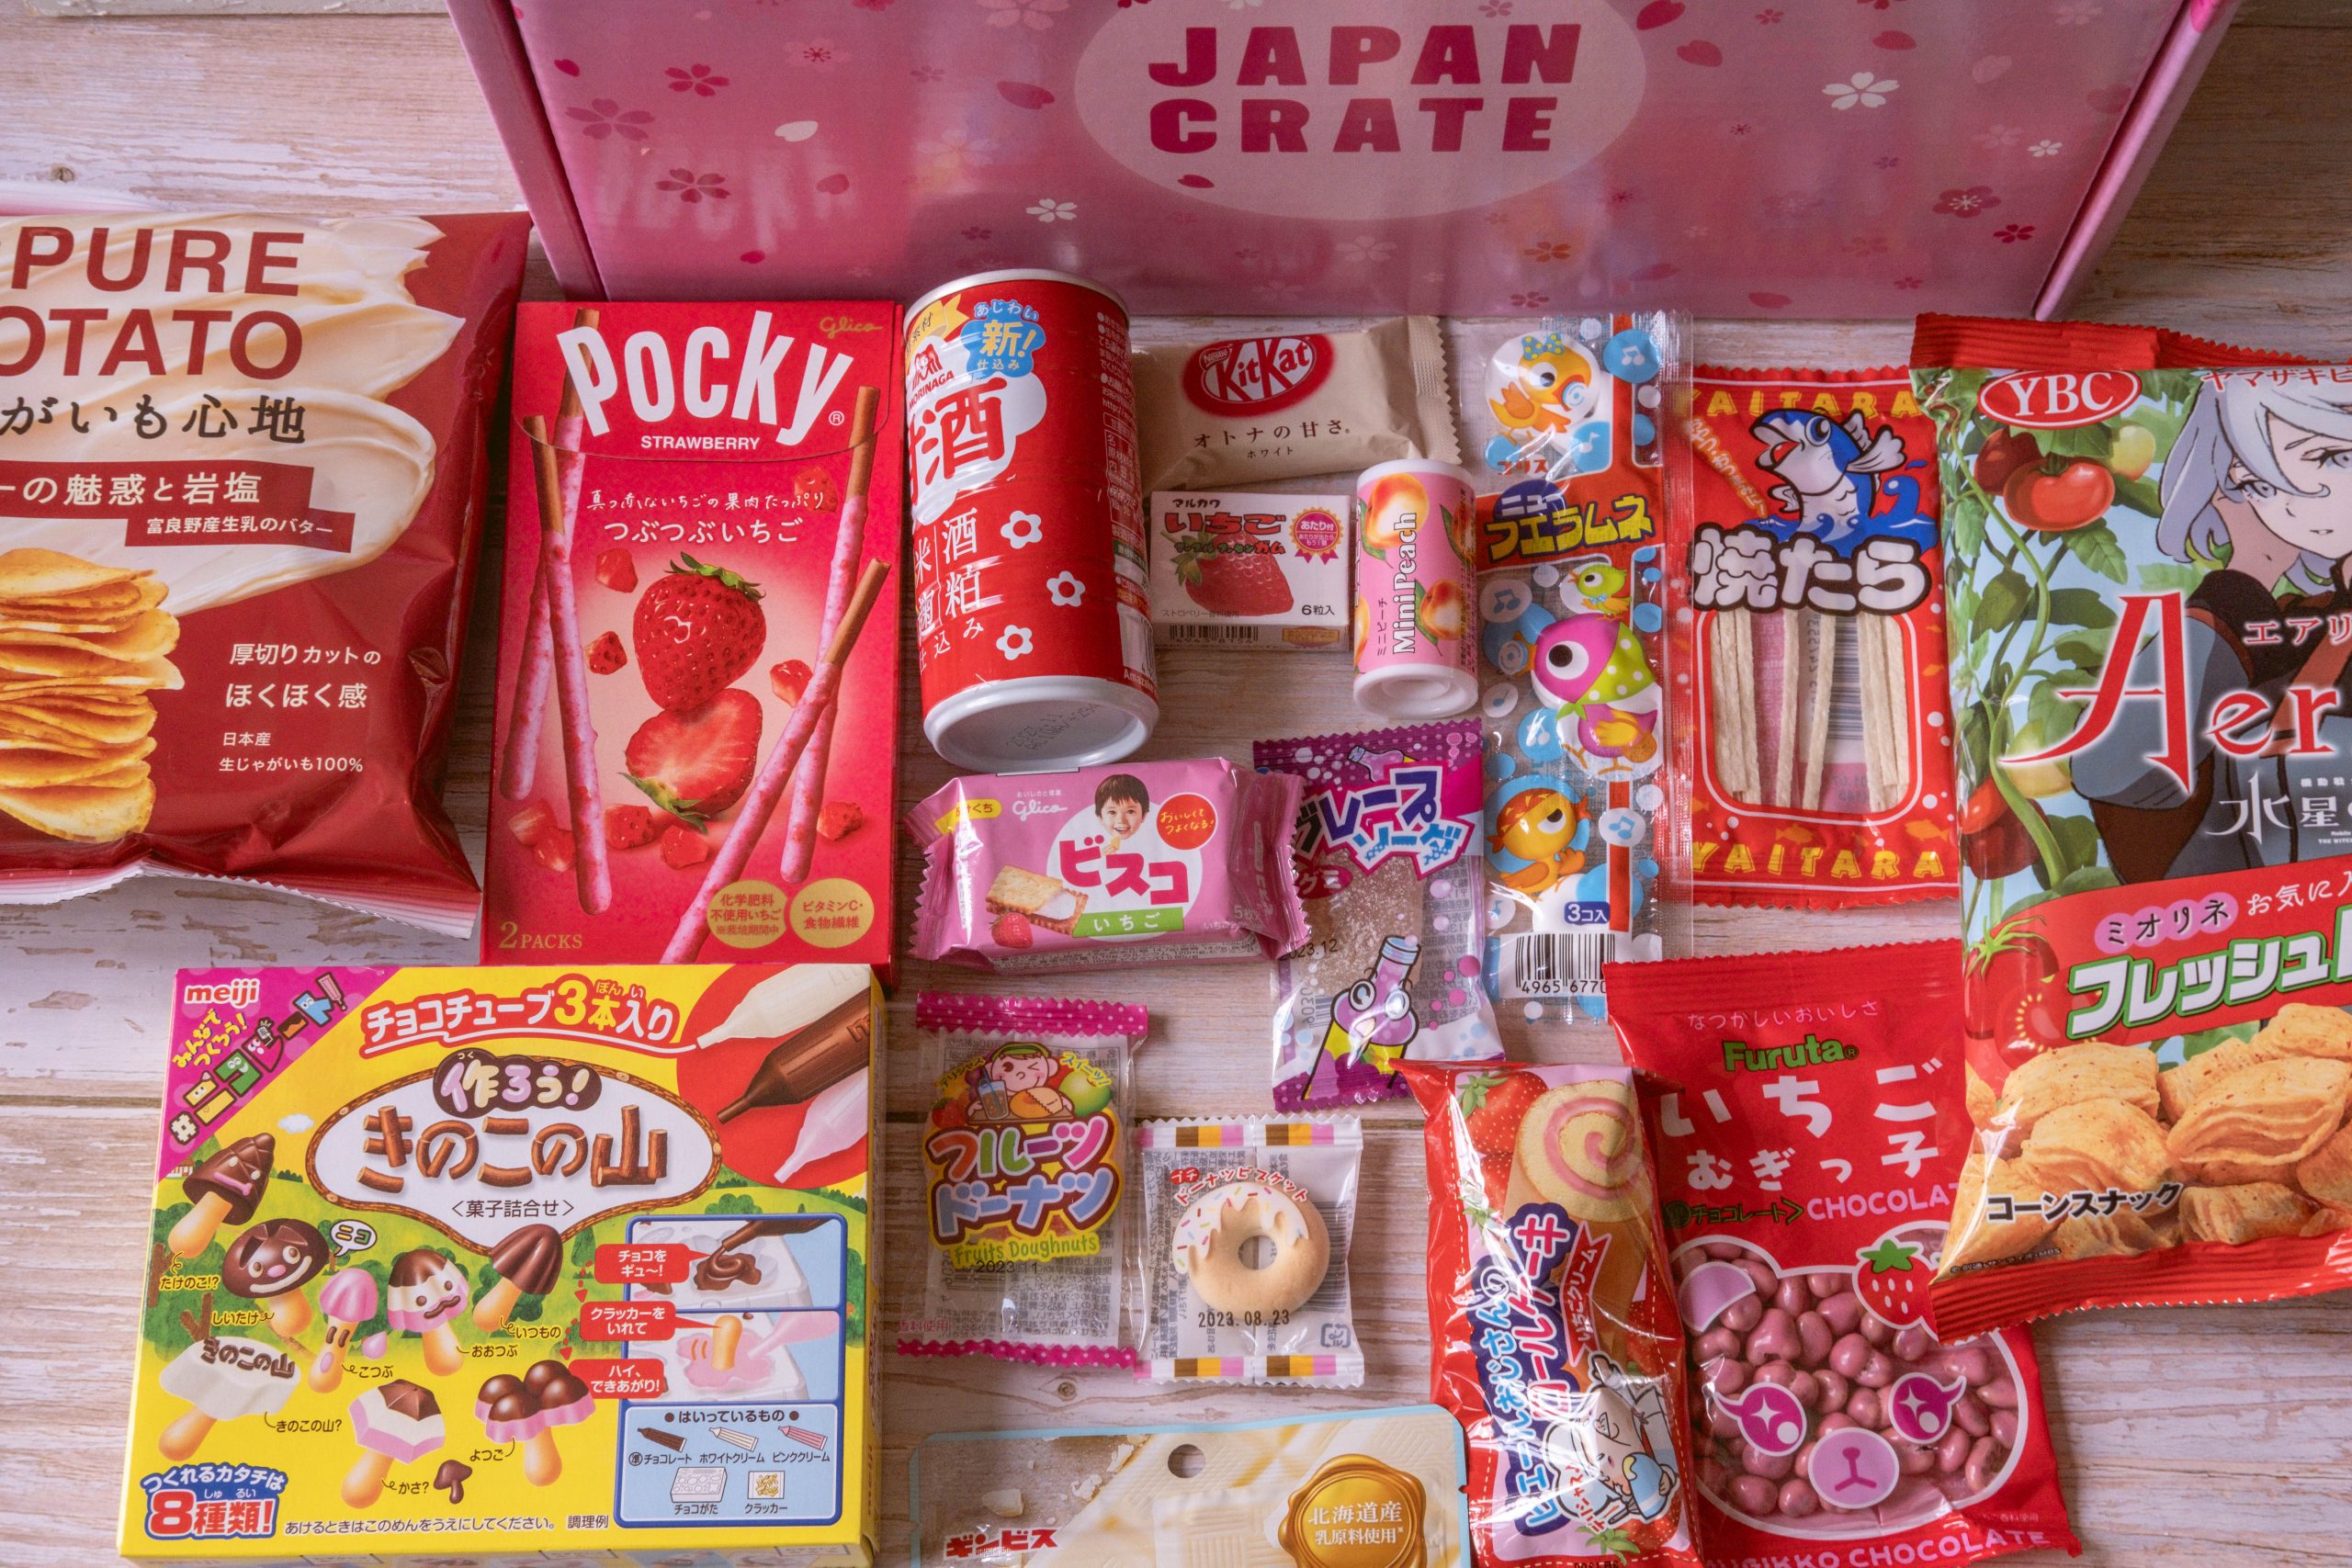 Contents of a Japan crate box